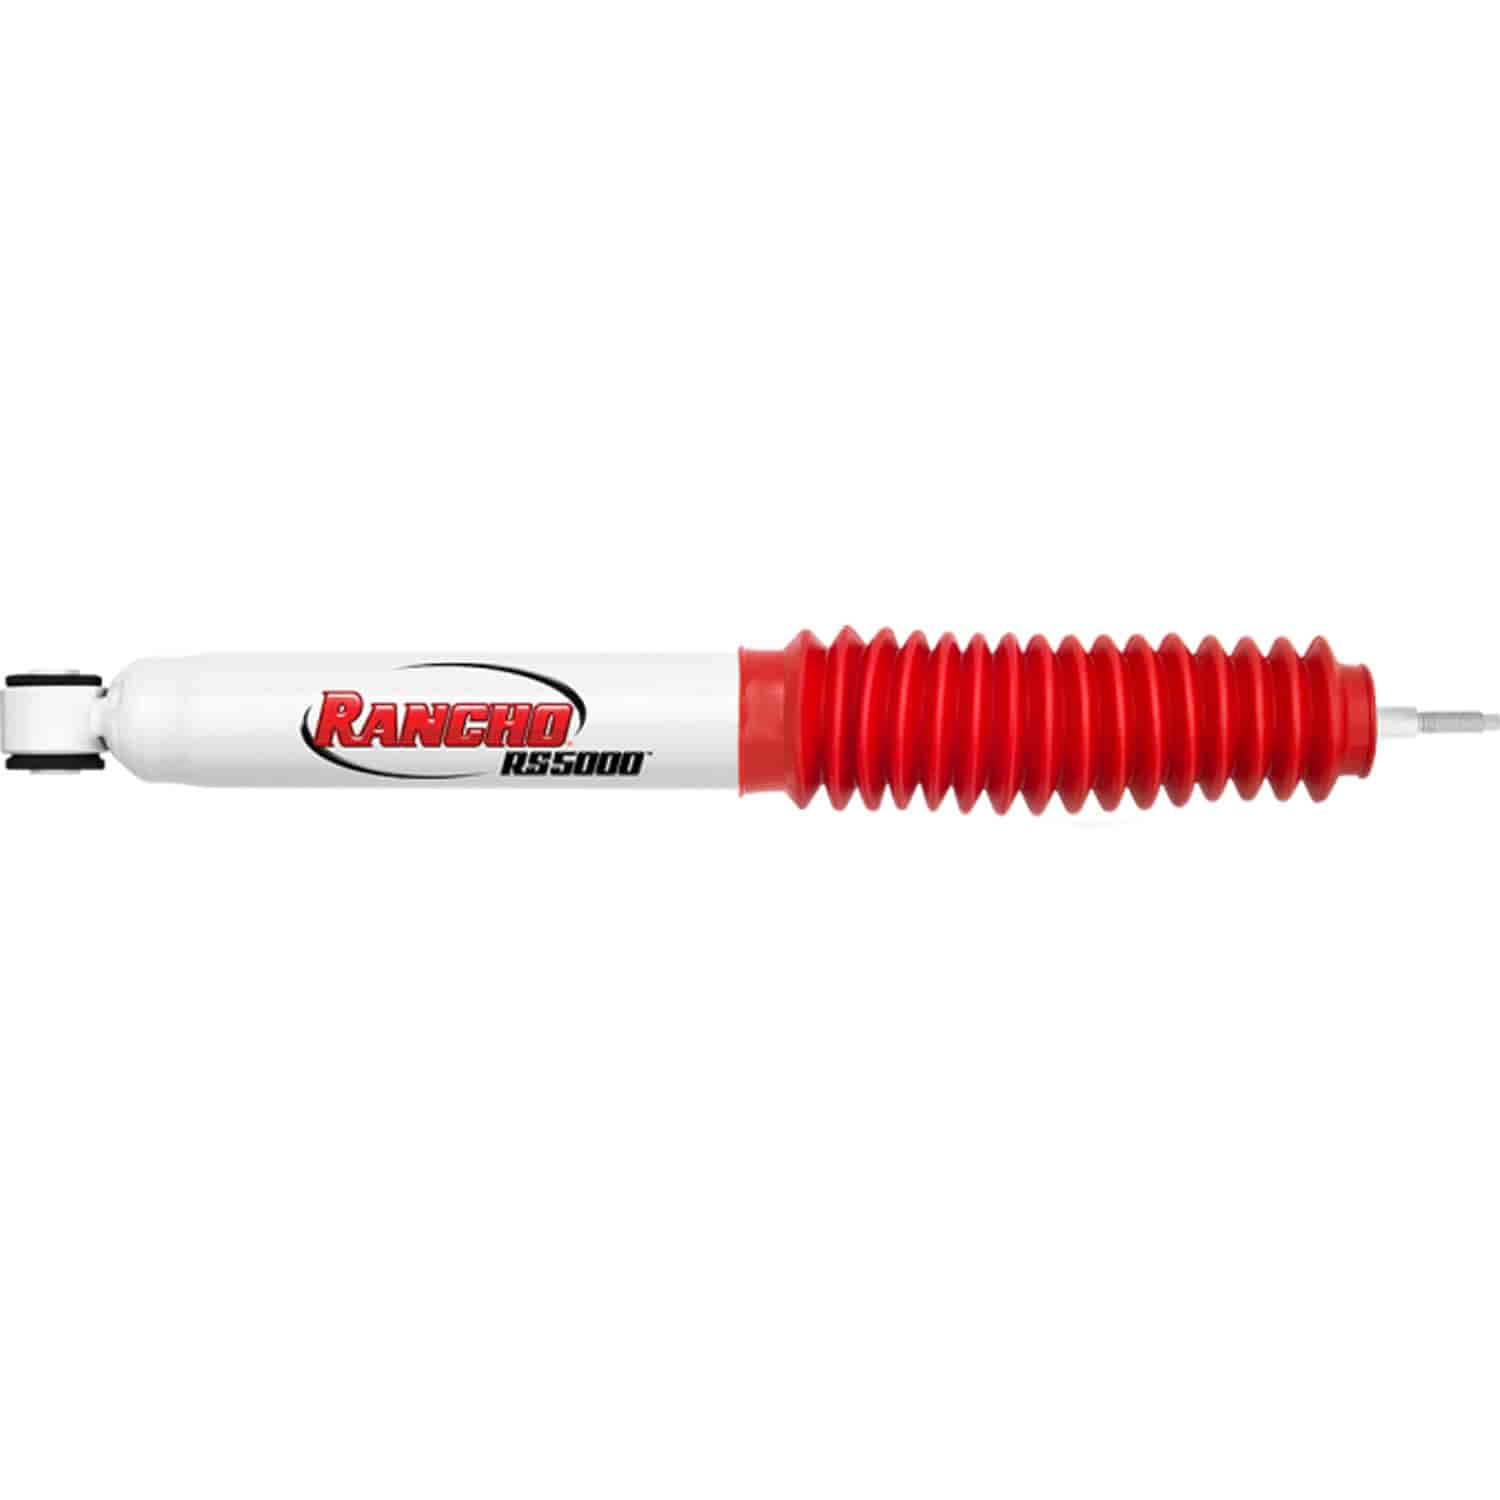 RS5000 Rear Shock Absorber Fits Toyota Tacoma